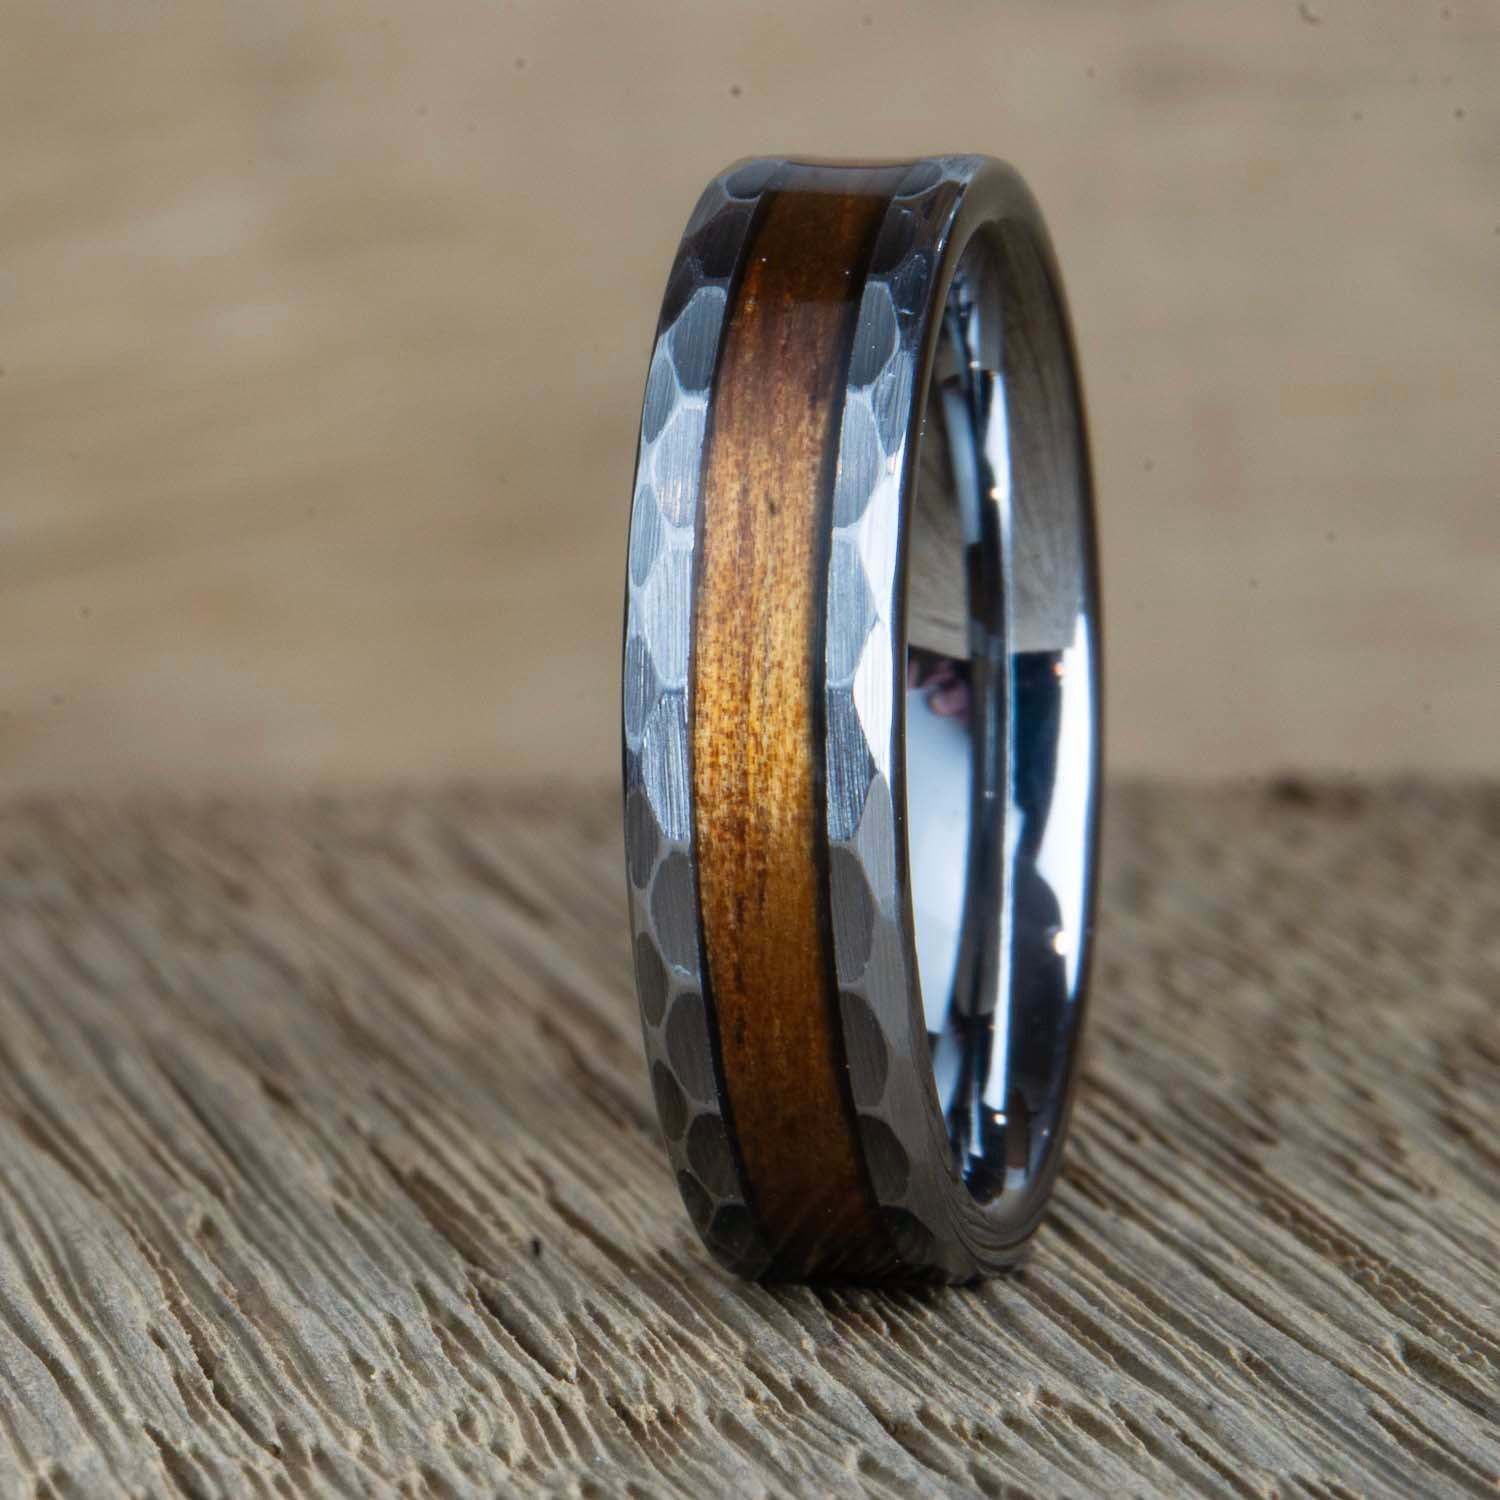 "Hammered Koa" Tungsten ring with hammered look and Koa wood inlay